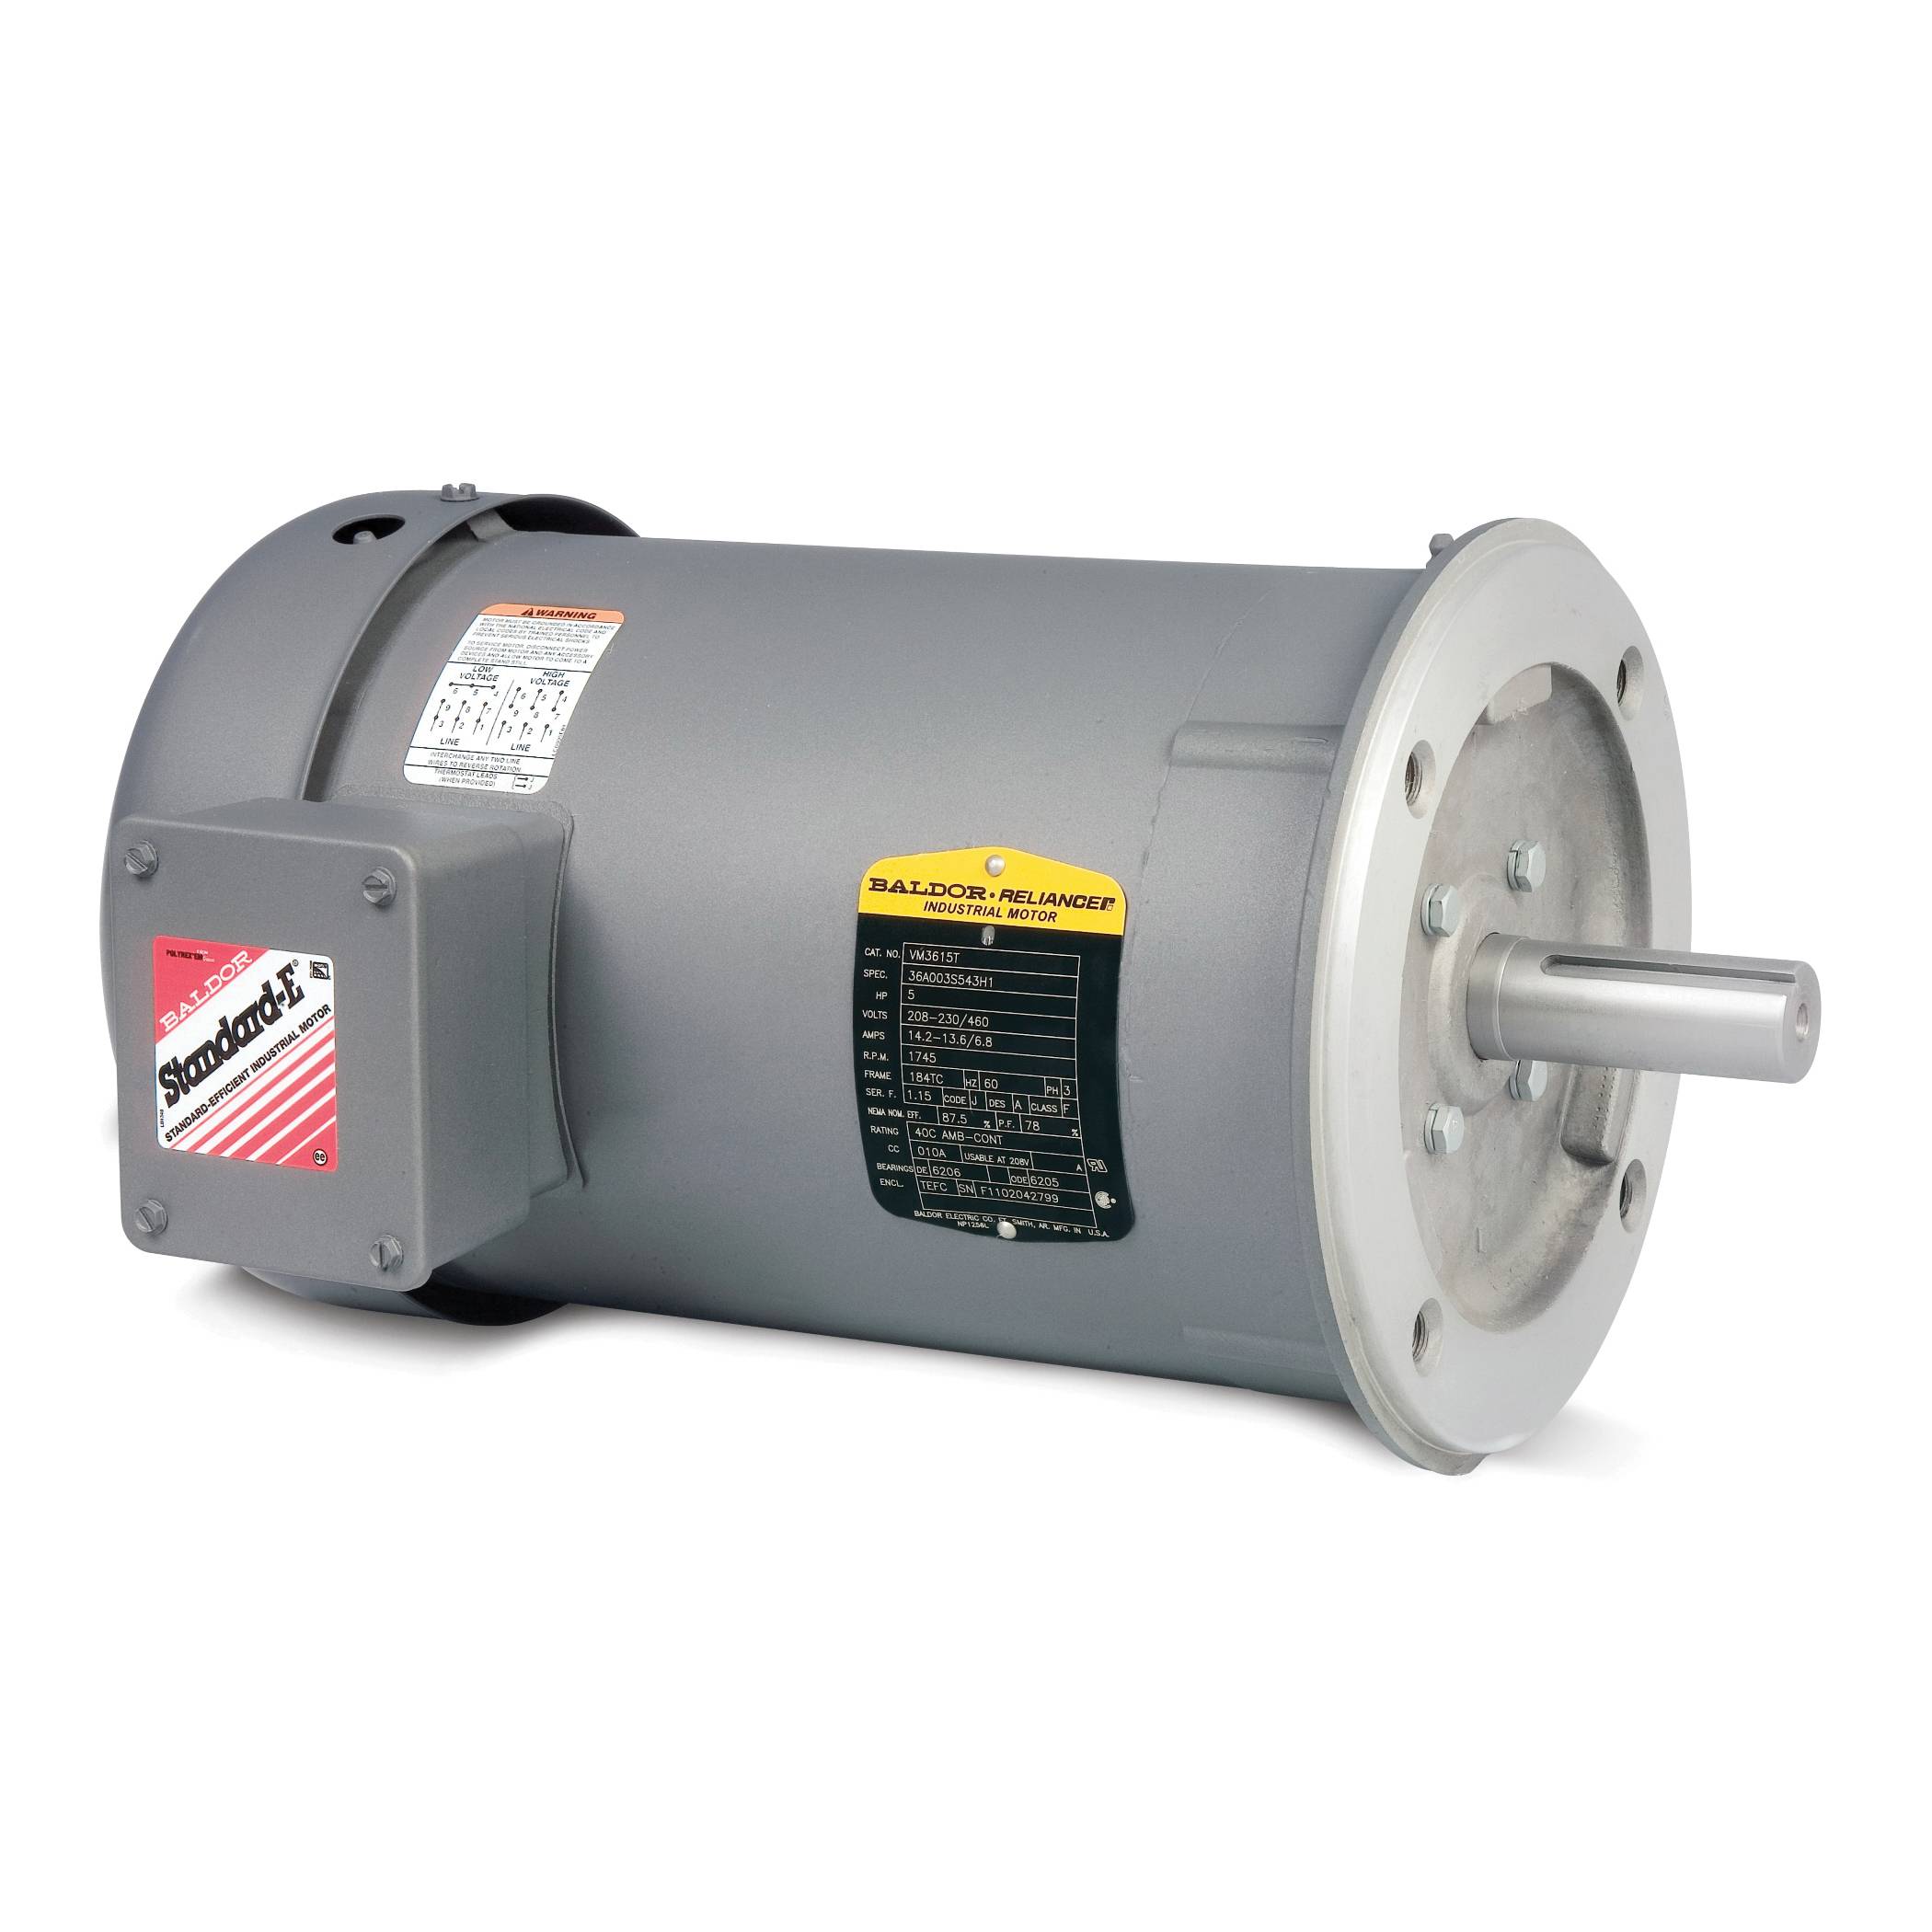 Baldor-Reliance VM3543 Type 3428M Continuous Duty AC Motor, Totally Enclosed Fan Cooled Enclosure, 3/4 hp, 208/230/460 VAC, 60 Hz, 3 Phase, 56C Frame, 1140 rpm Speed, C-Face Footless Mount